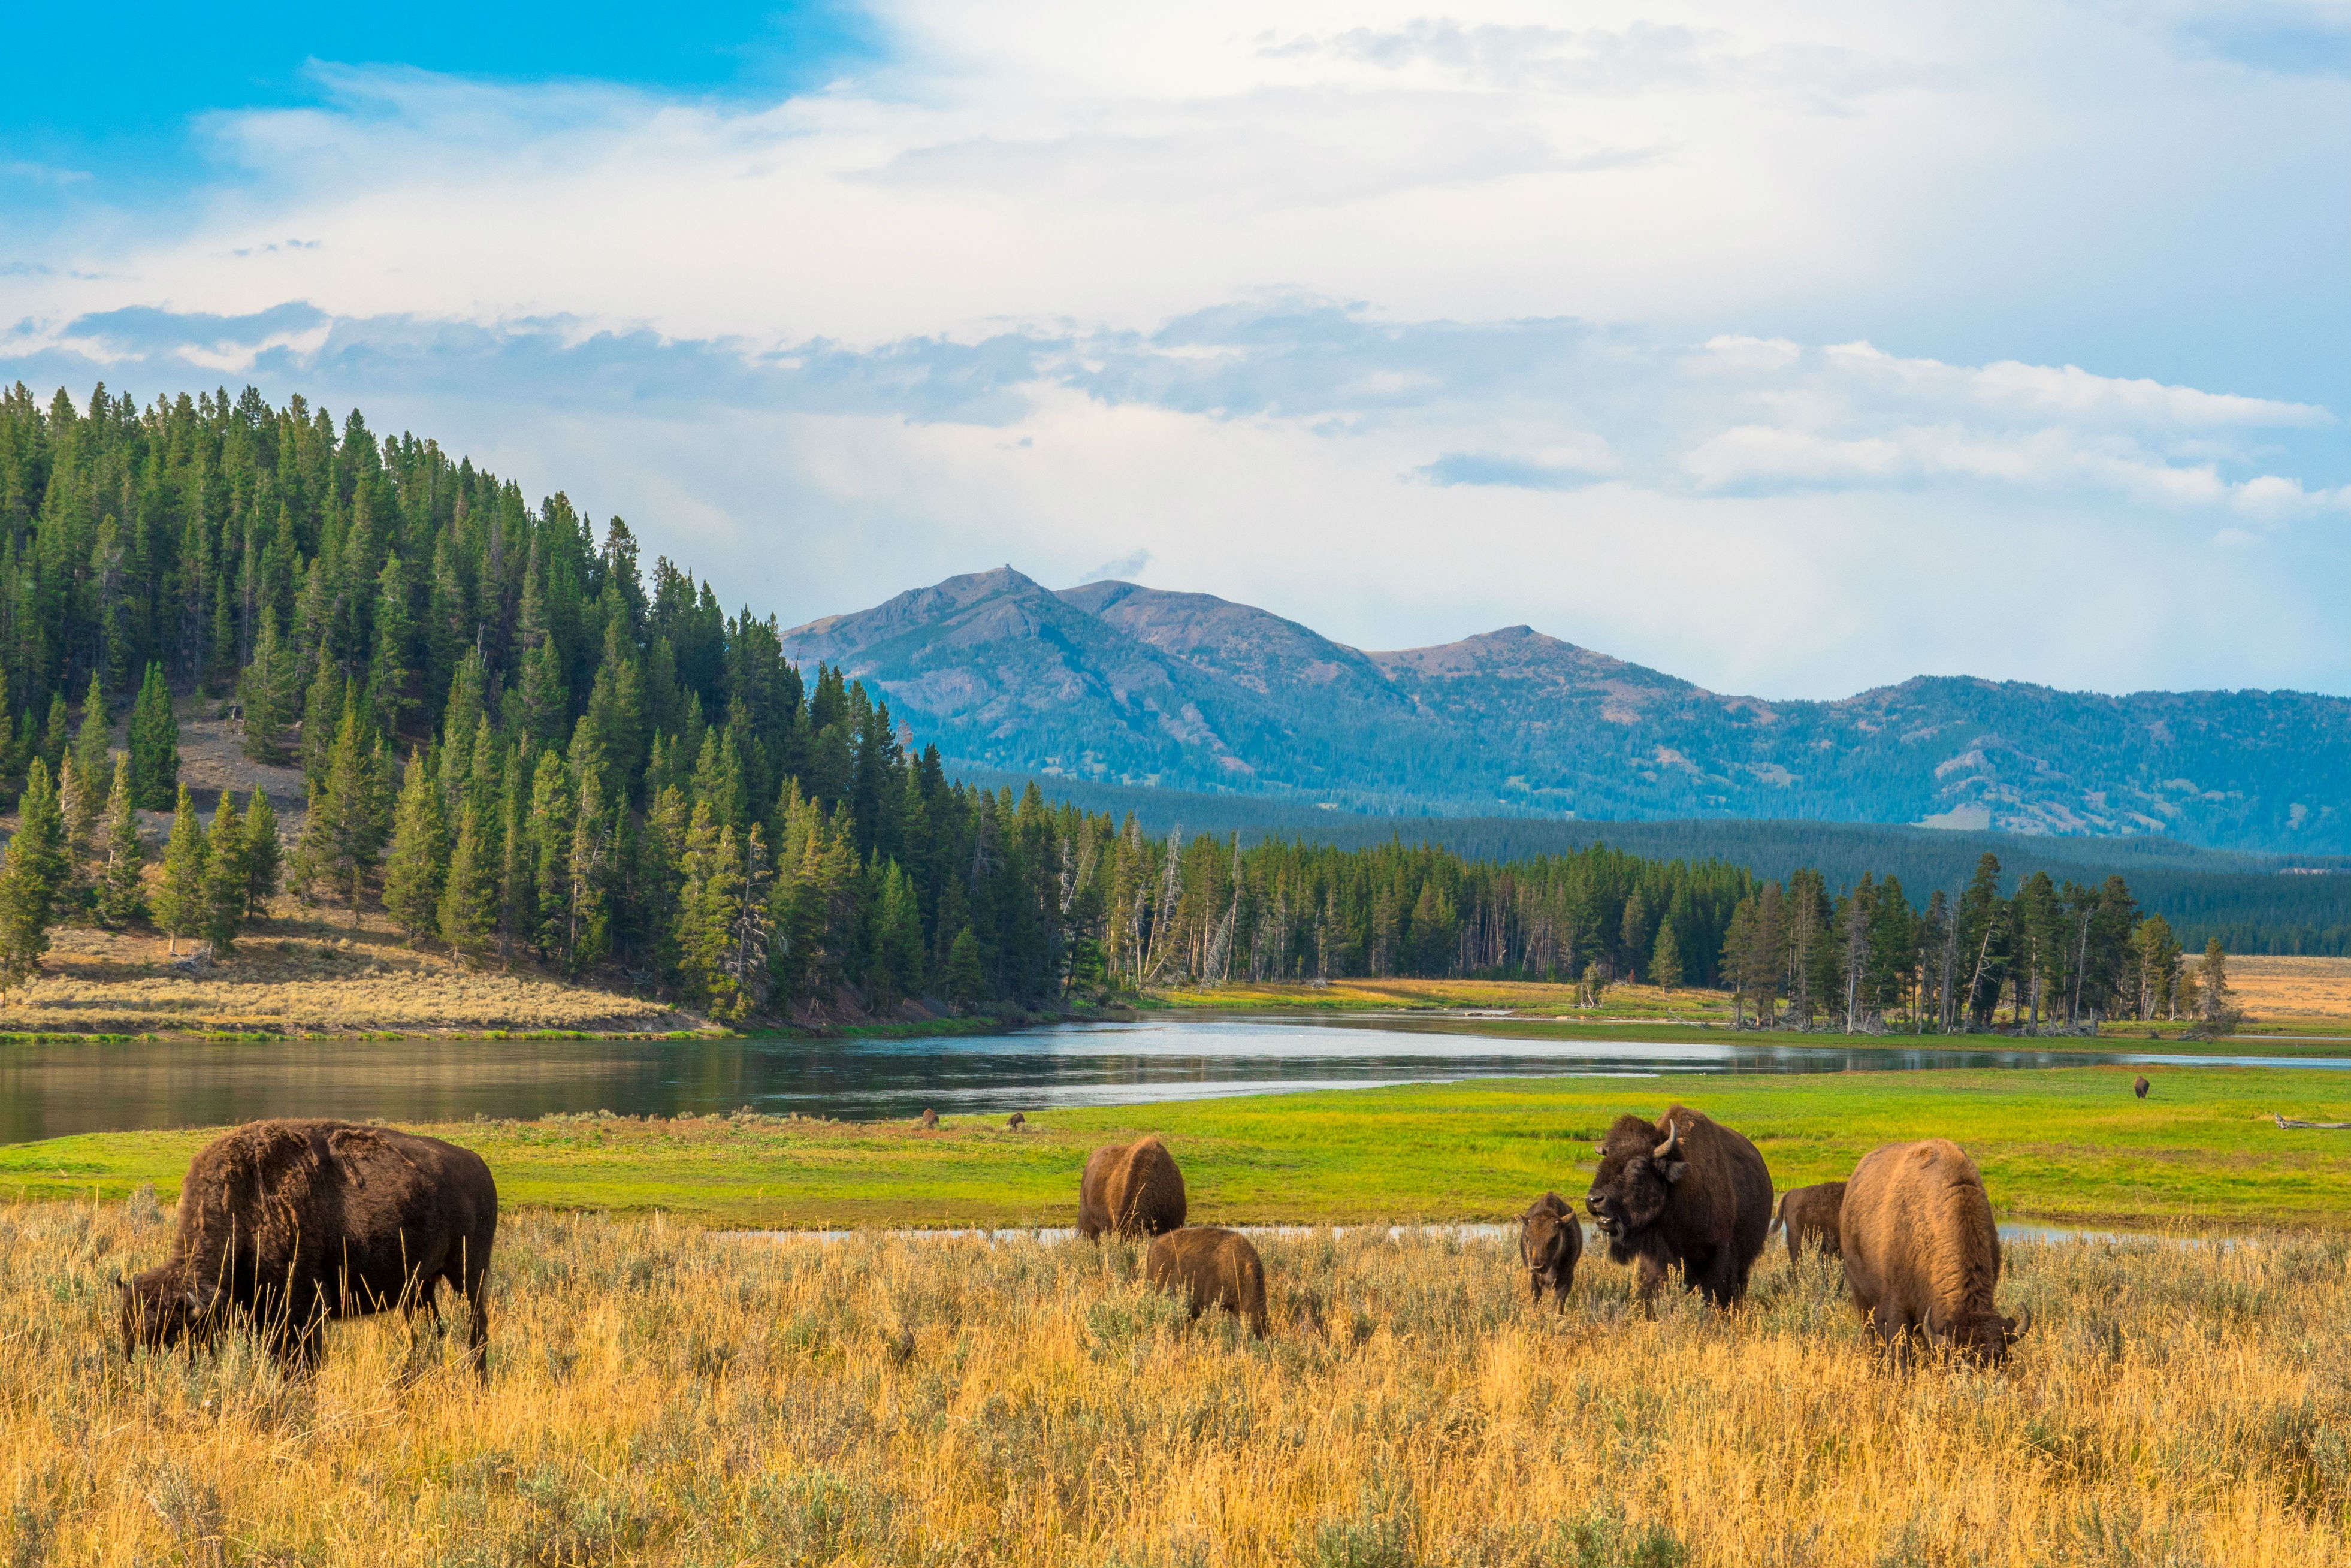 Yellowstone National Park opens up its East entrance